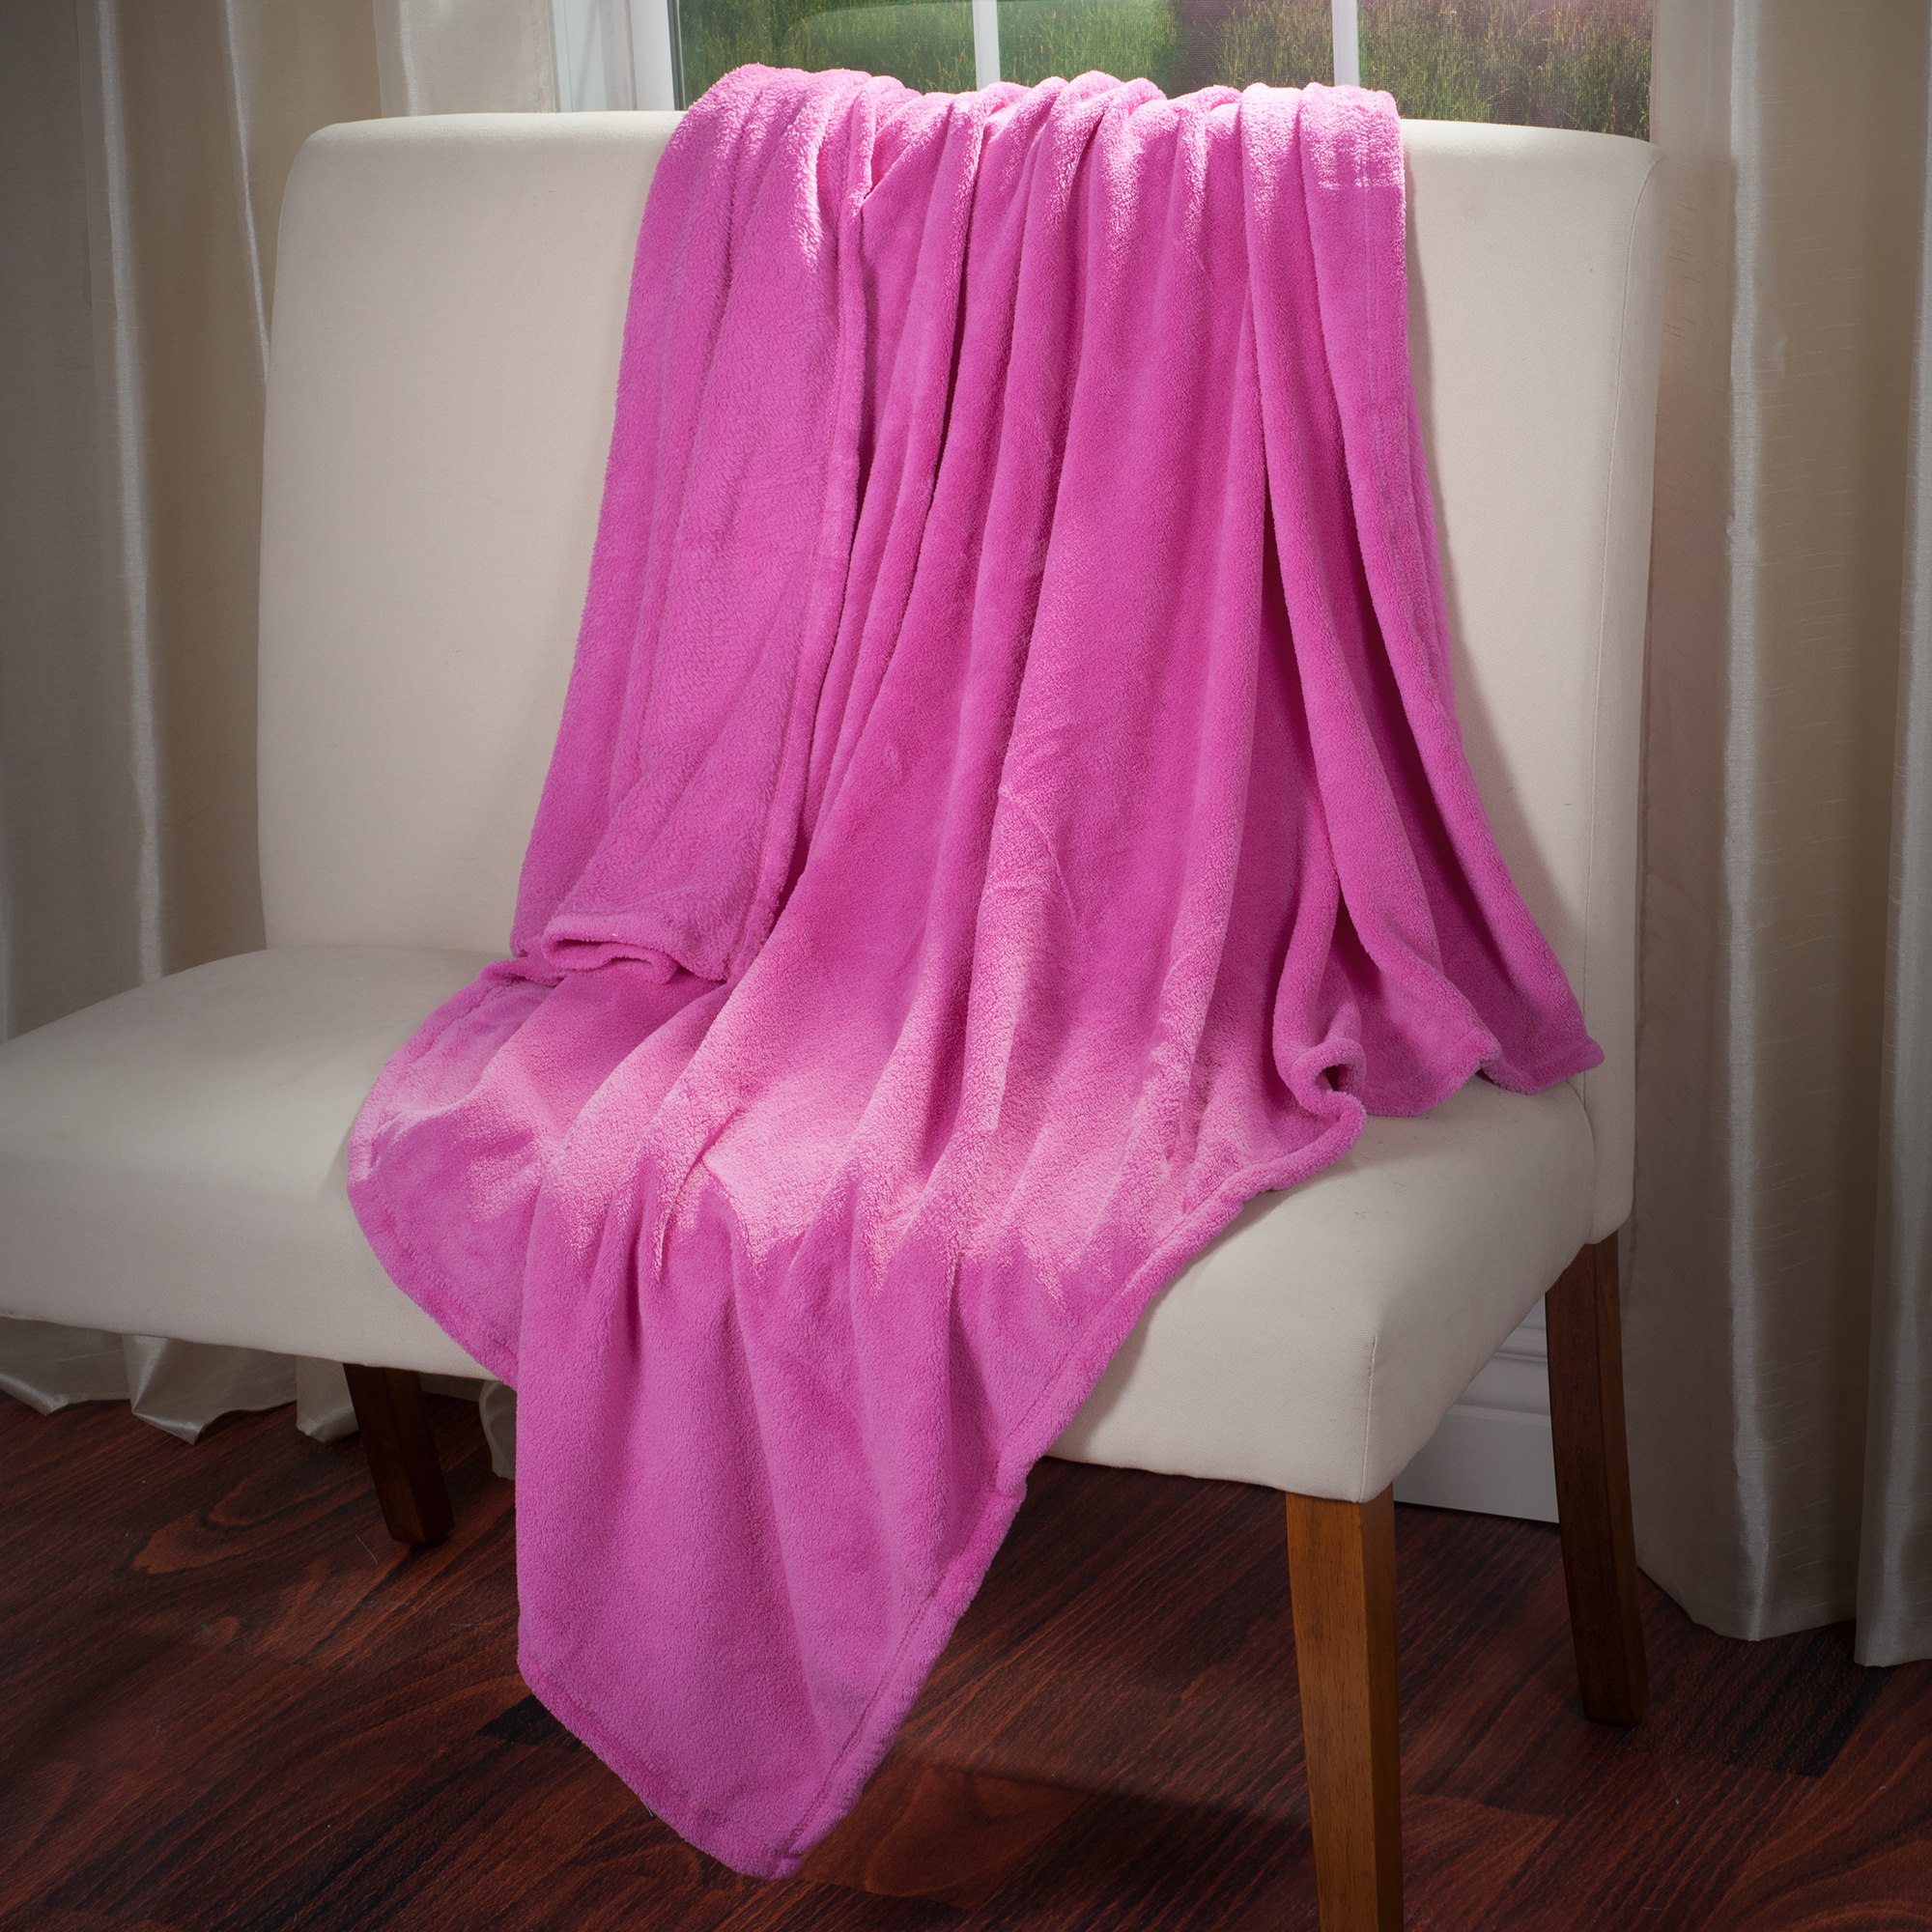 Pink Velvety Soft Plush Fuzzy Comfy Lightweight Bright Throw 50 X 60 Inches